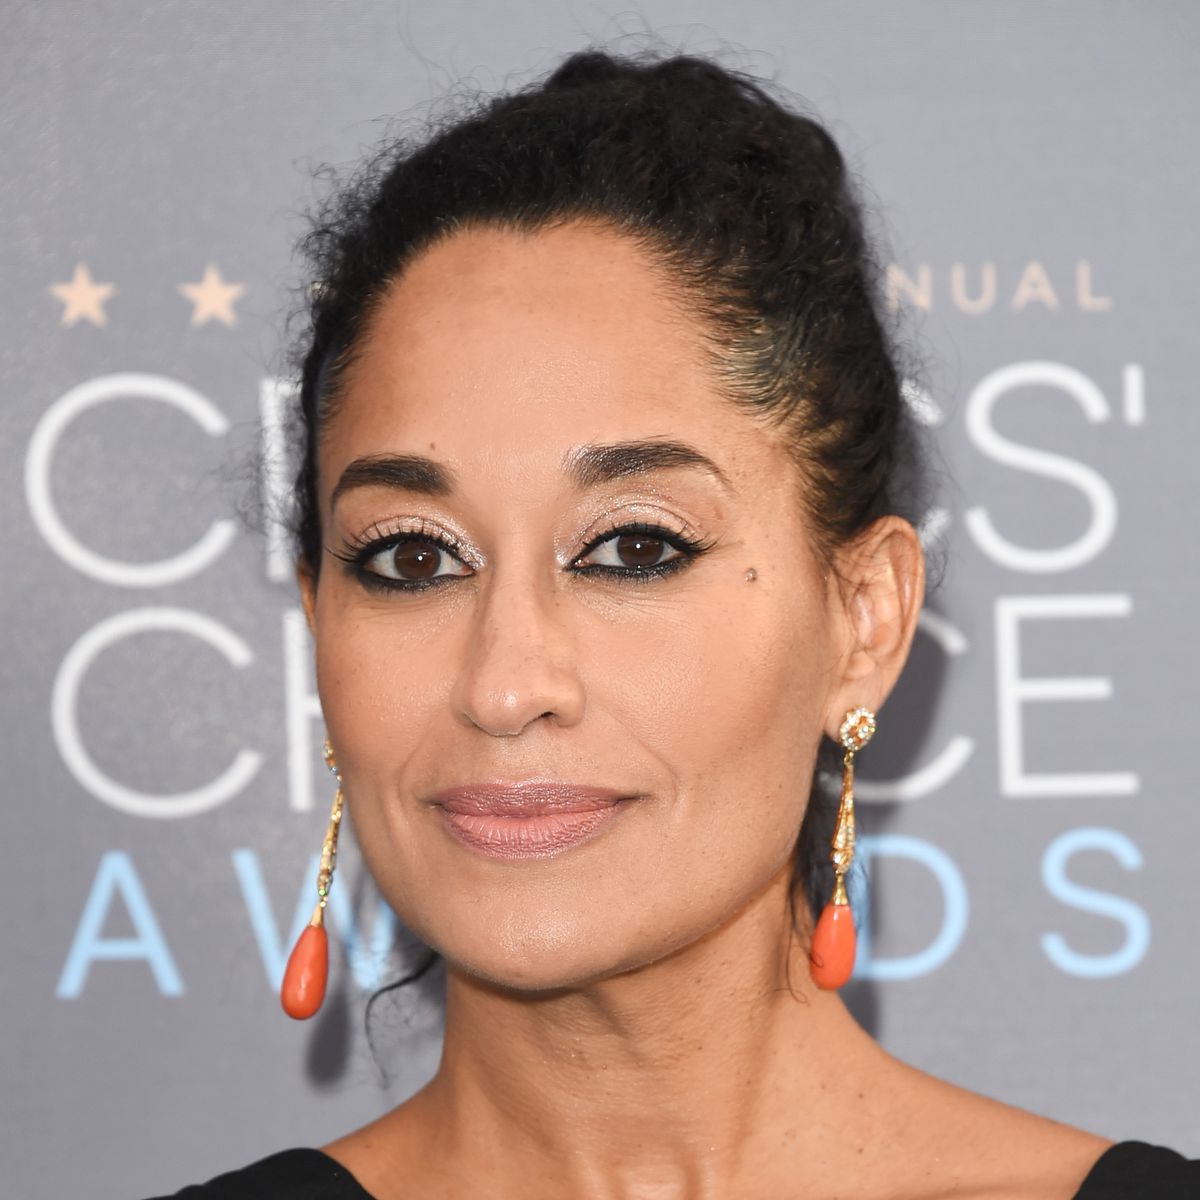 Actress Tracee Ellis Ross attends the 21st Annual Critics' Choice Awards